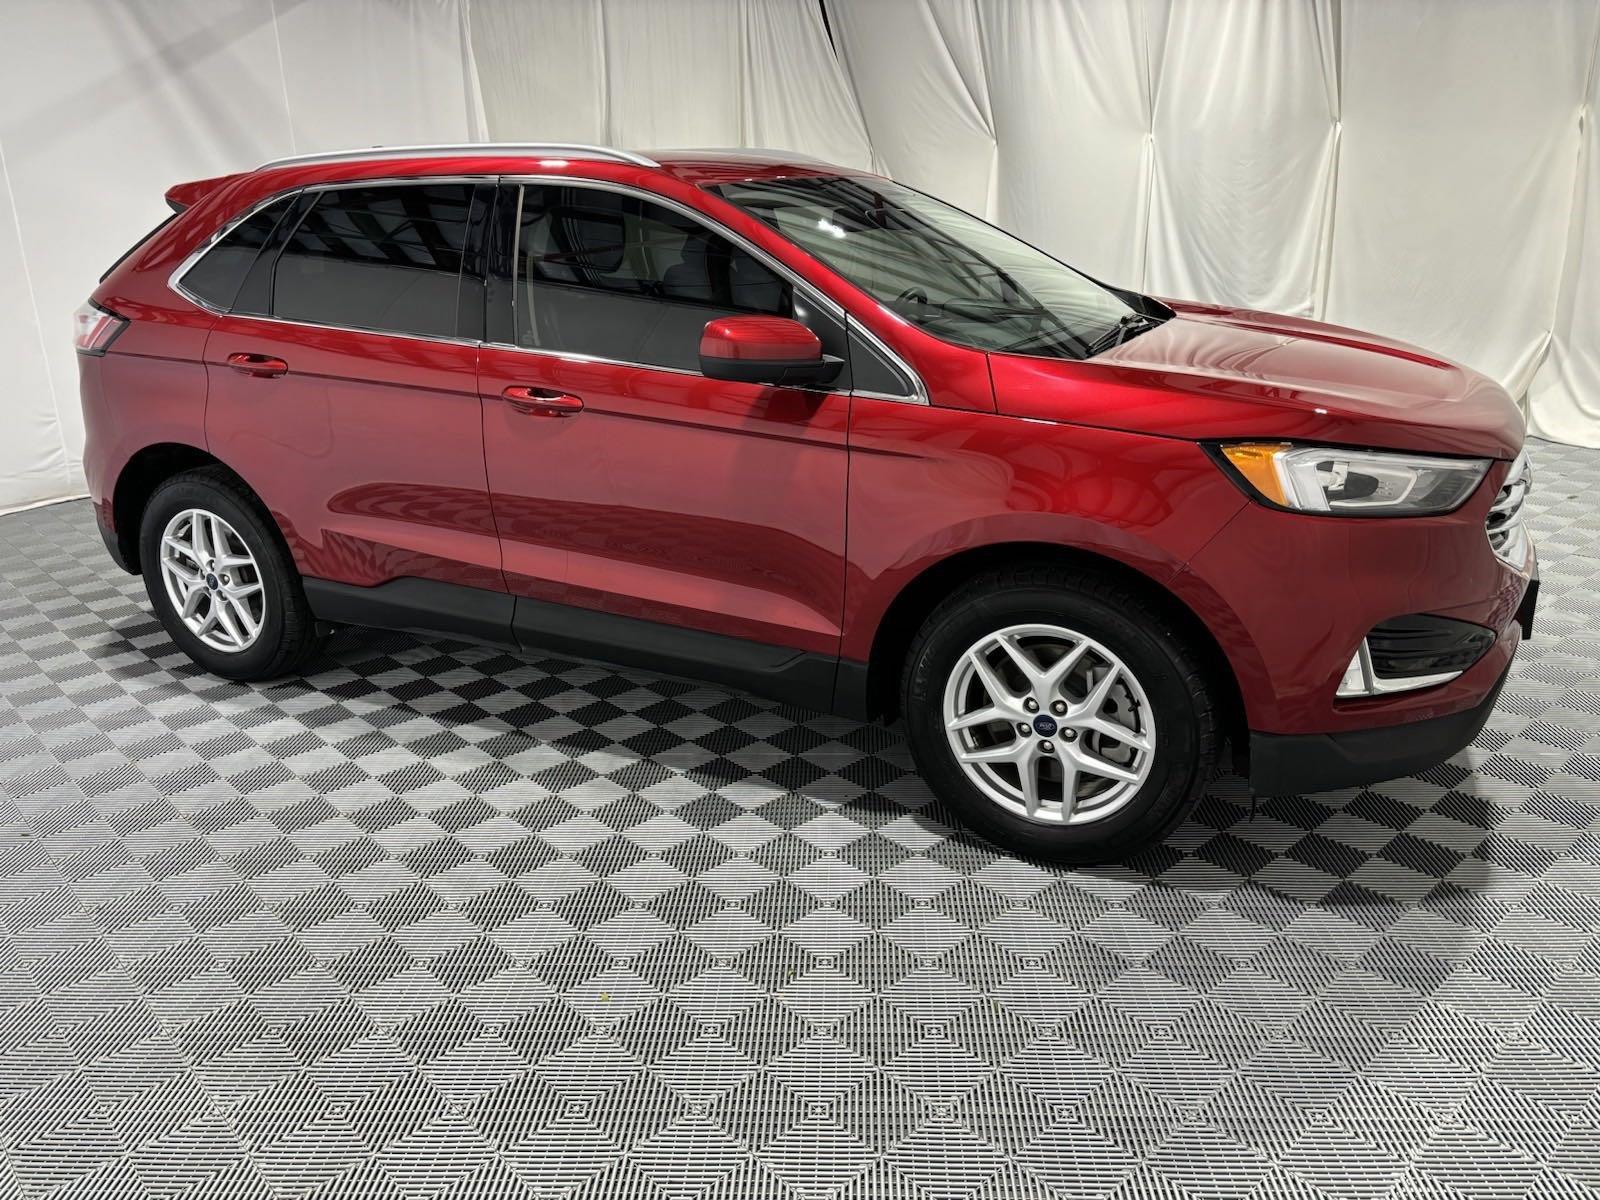 Used 2021 Ford Edge SEL Sport Utility for sale in St Joseph MO